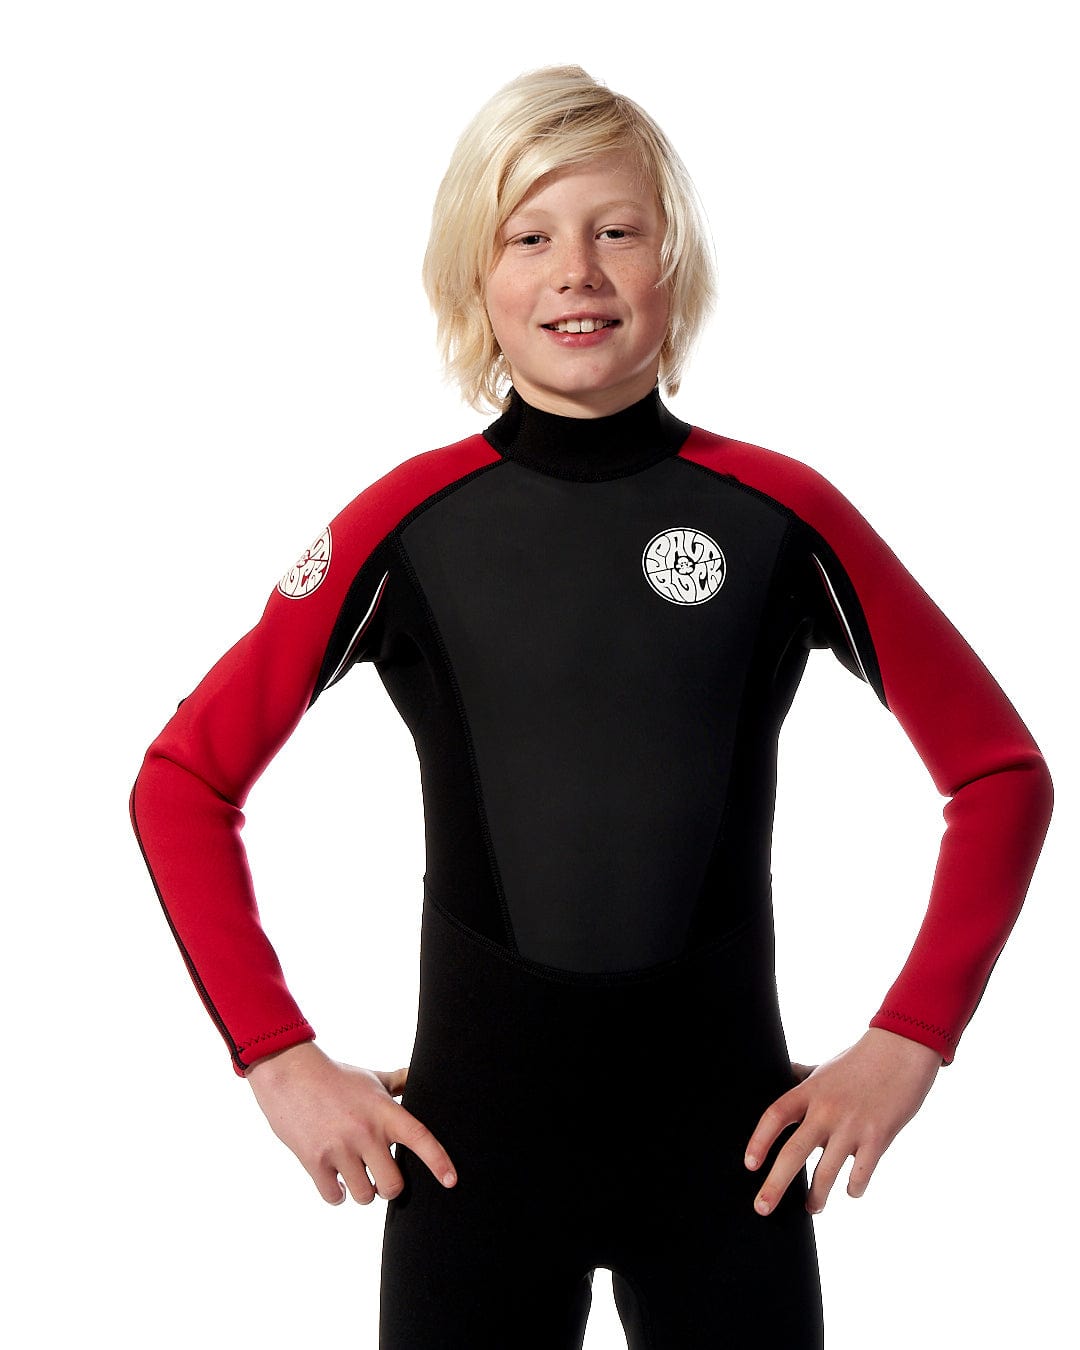 A young boy in a Saltrock Core - Kids 3/2 Full Wetsuit - Red posing for a photo.